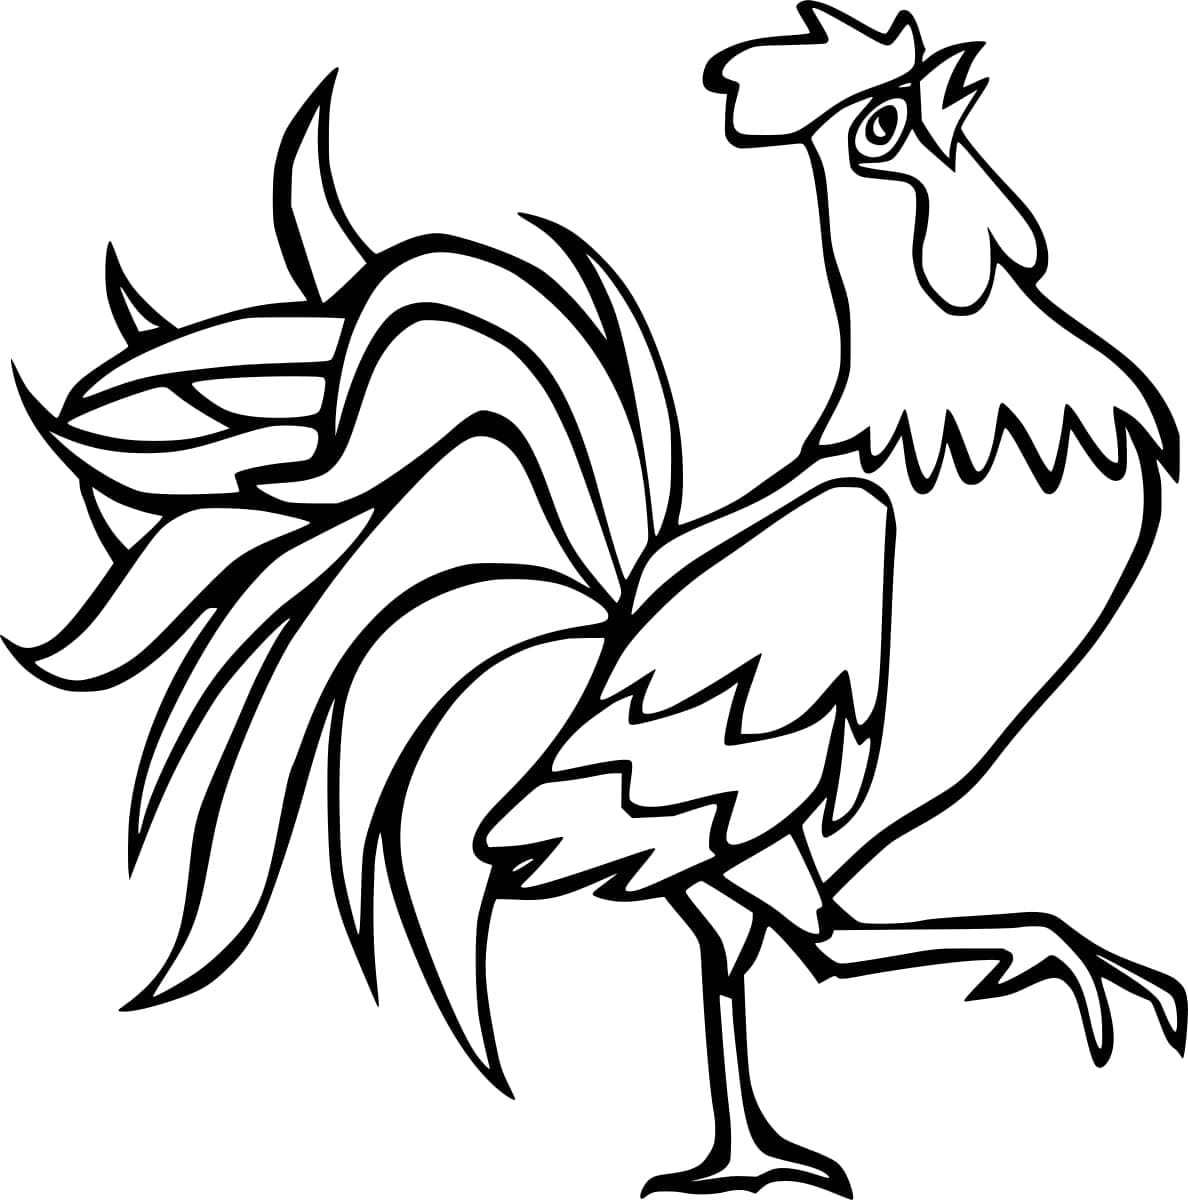 Fier Coq coloring page